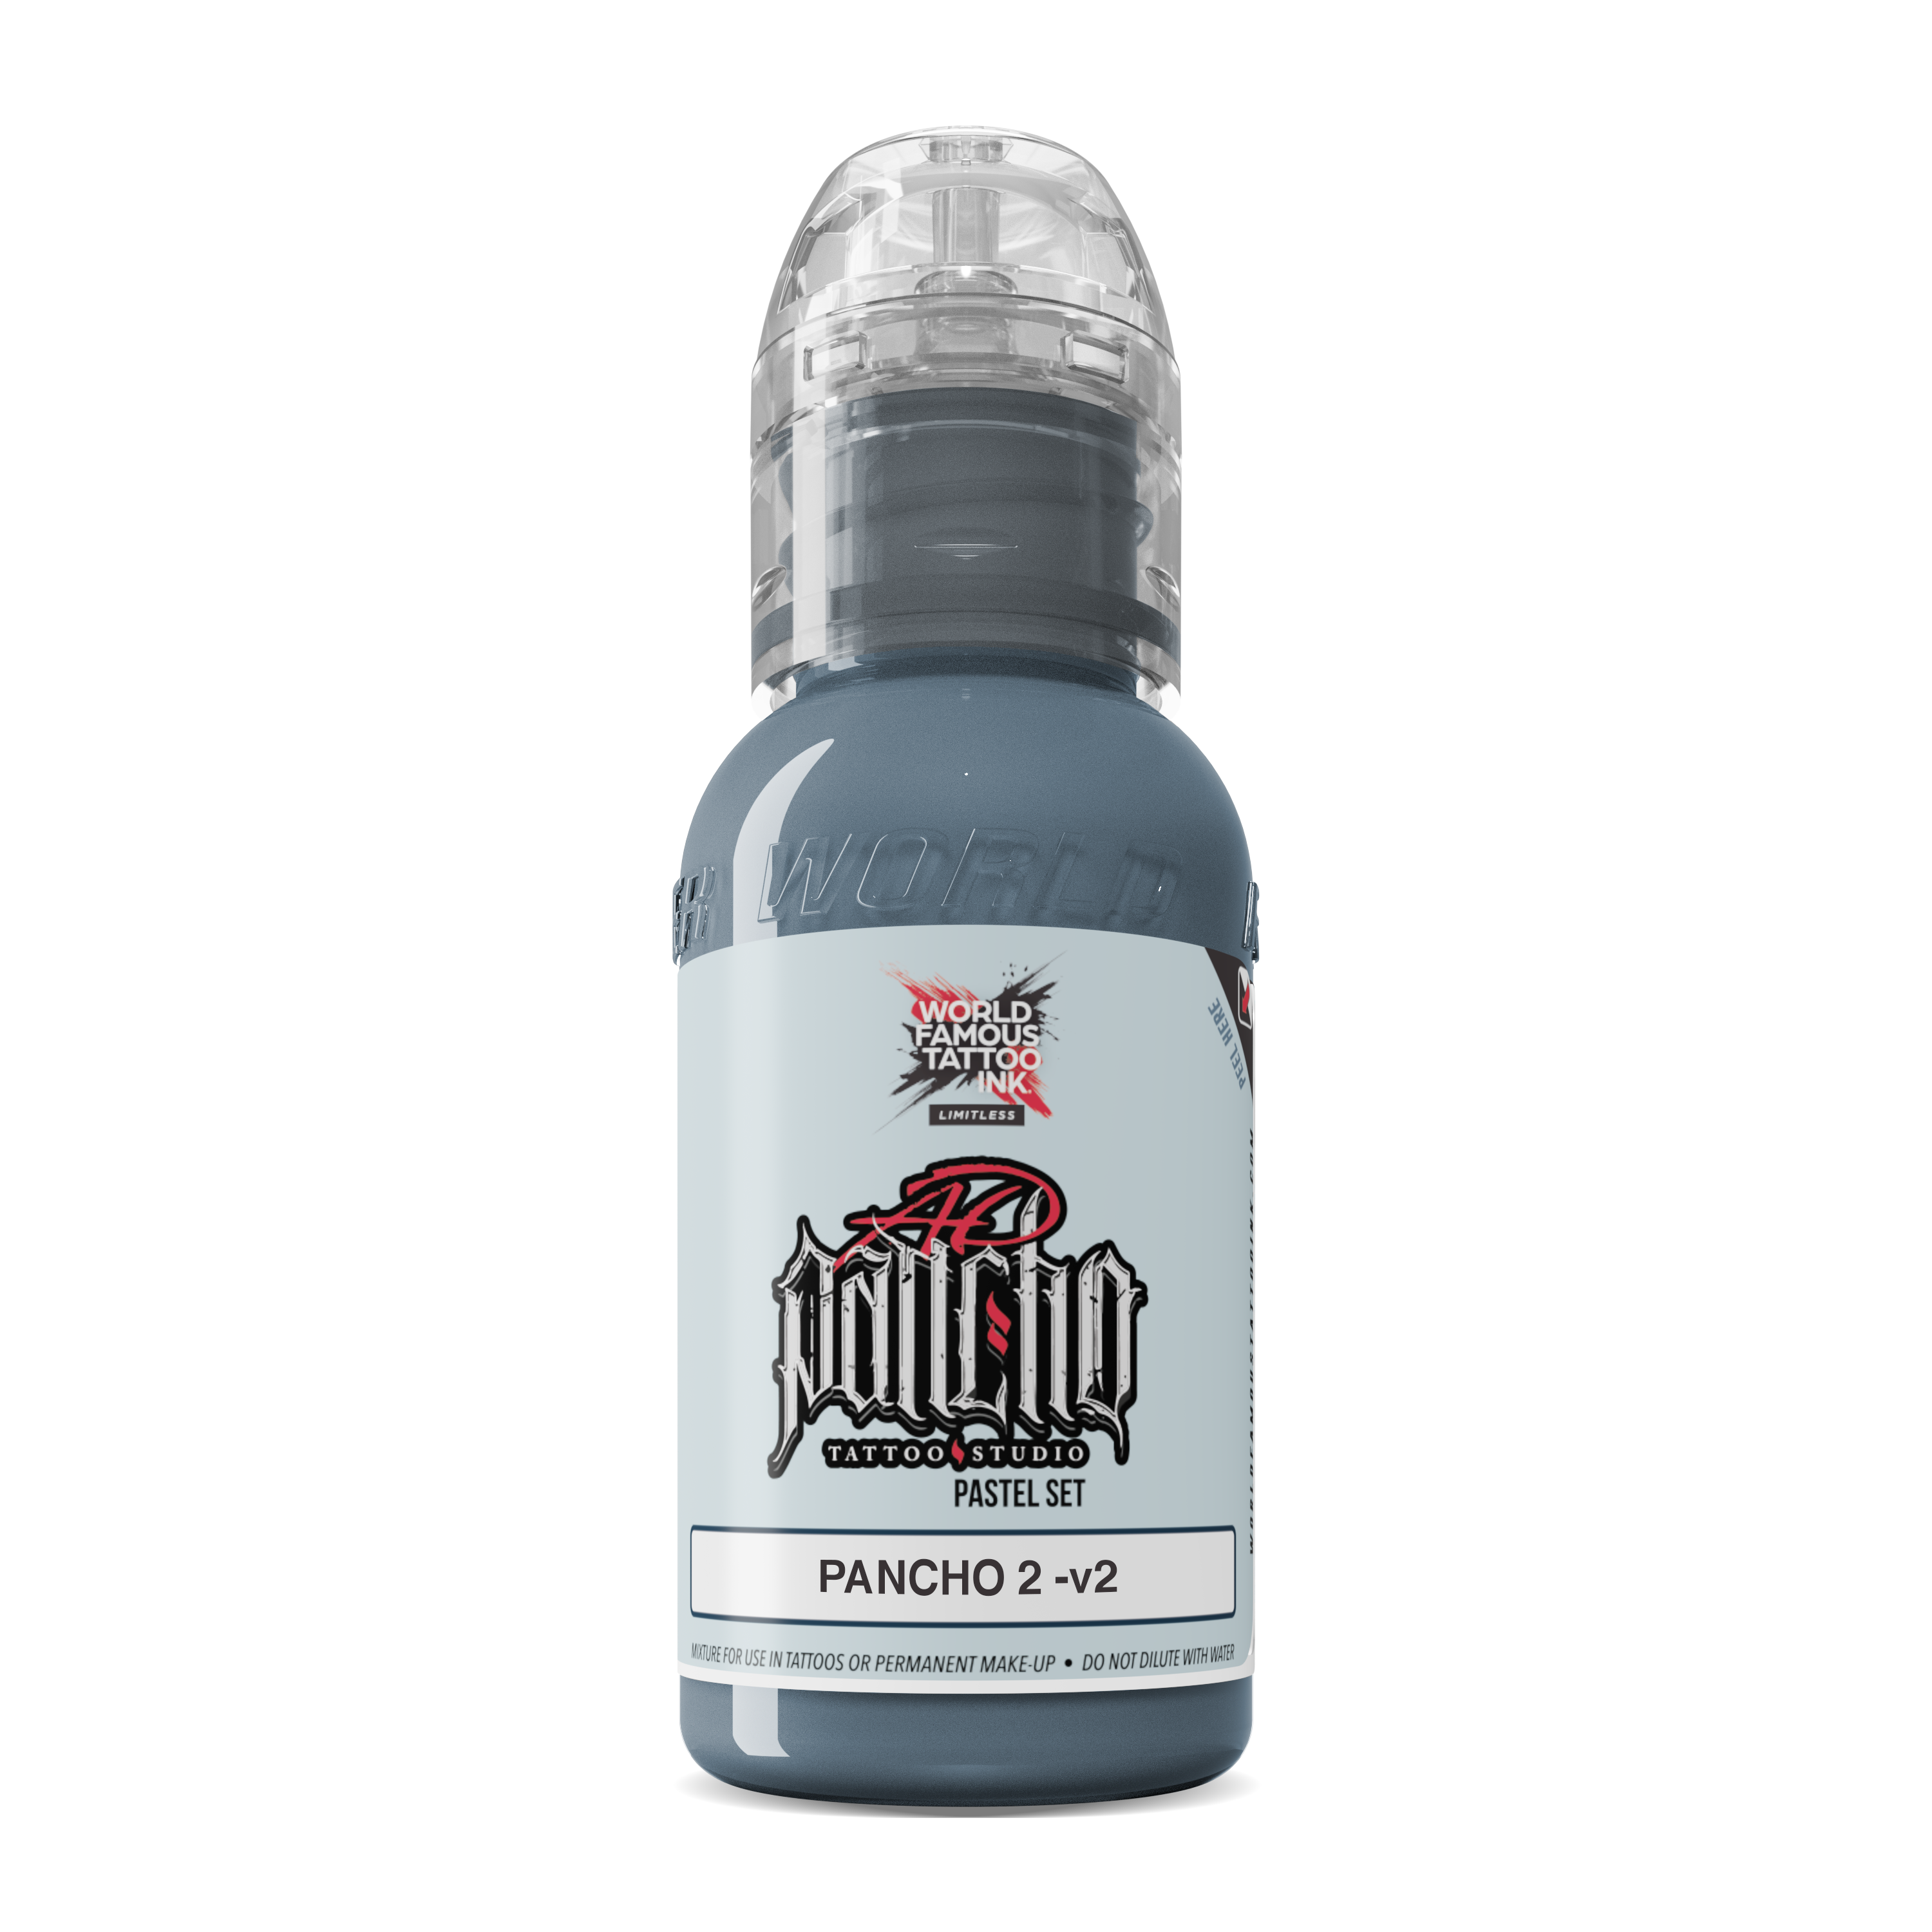 World Famous - Limitless Tattoo Ink - Pancho 2 v2 - 30 ml